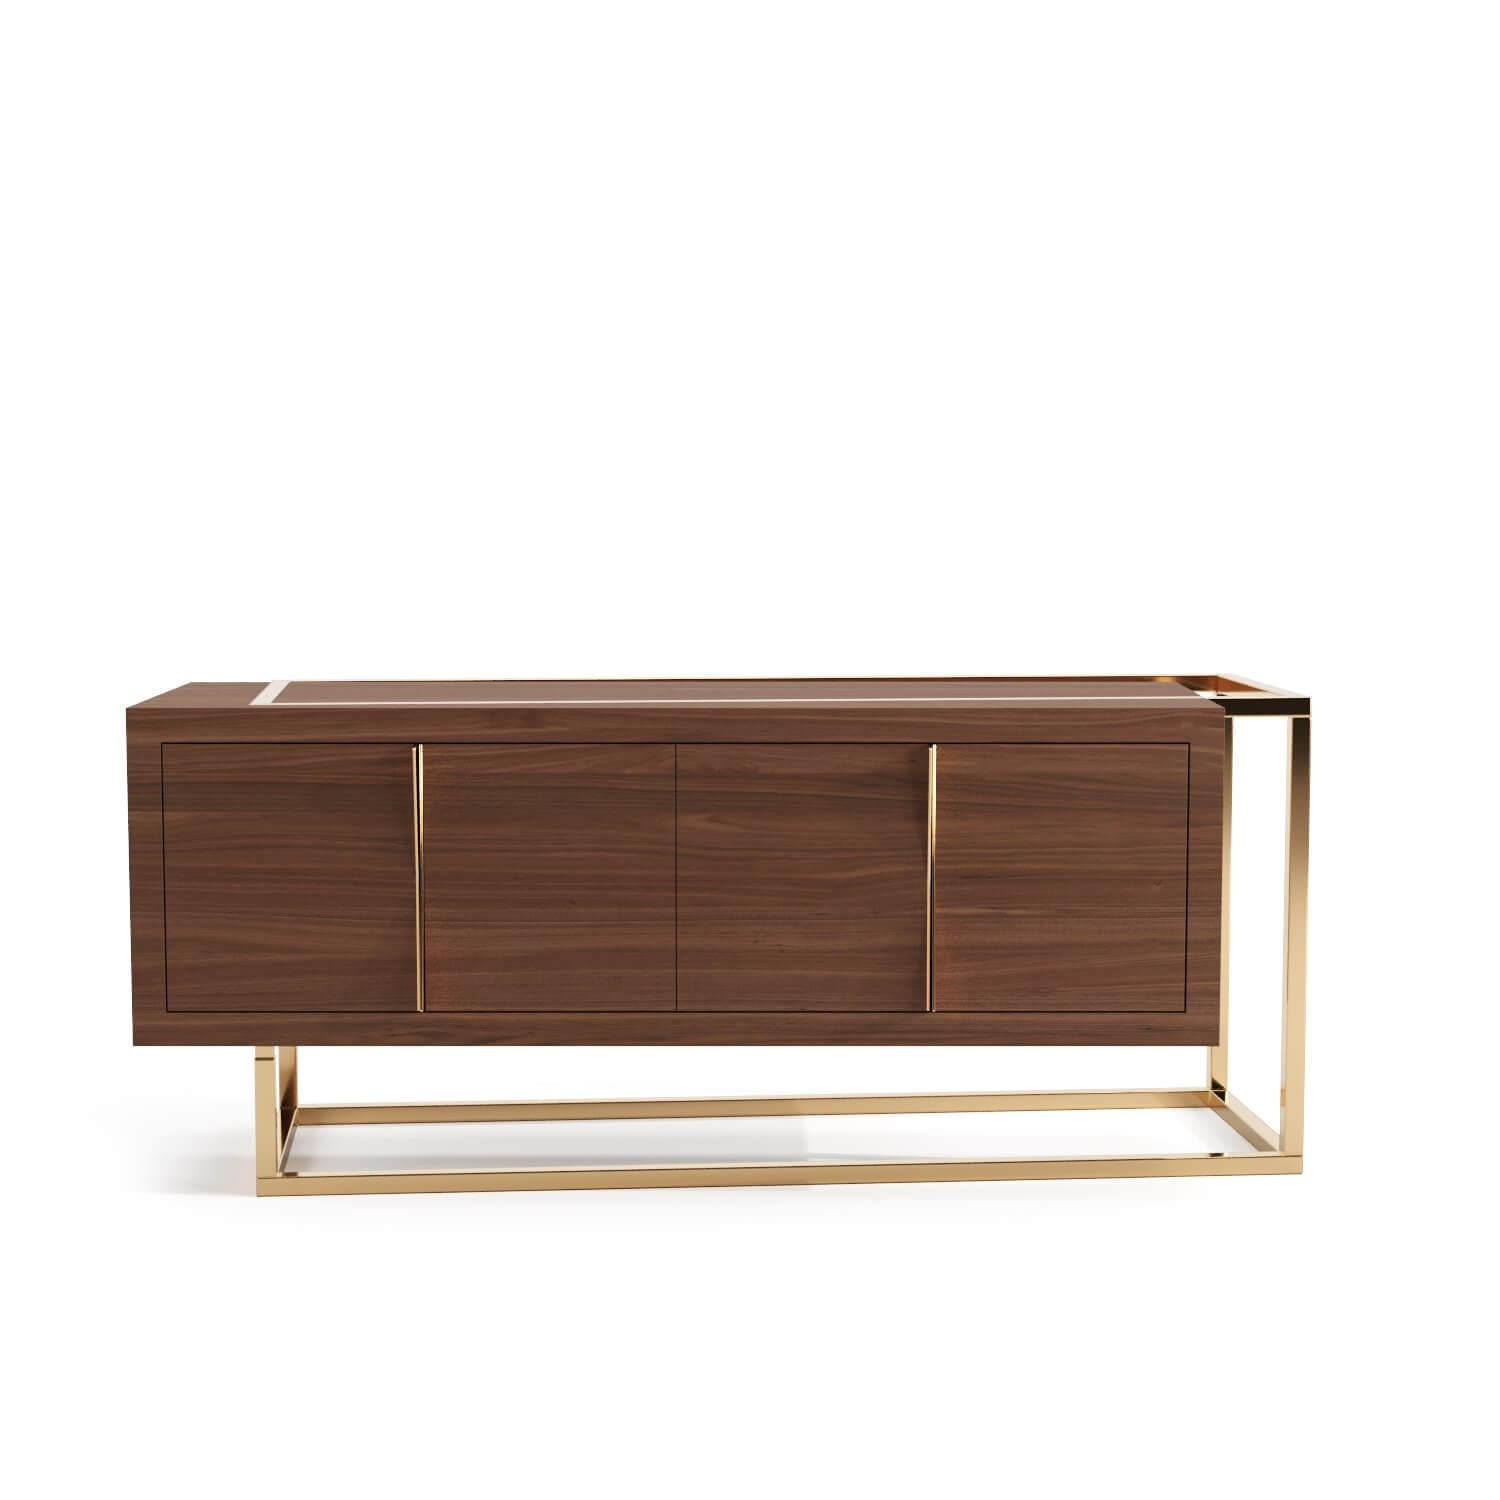 Modern Minimalist Credenza Sideboard in Tineo Wood and Brushed Stainless Steel For Sale 5